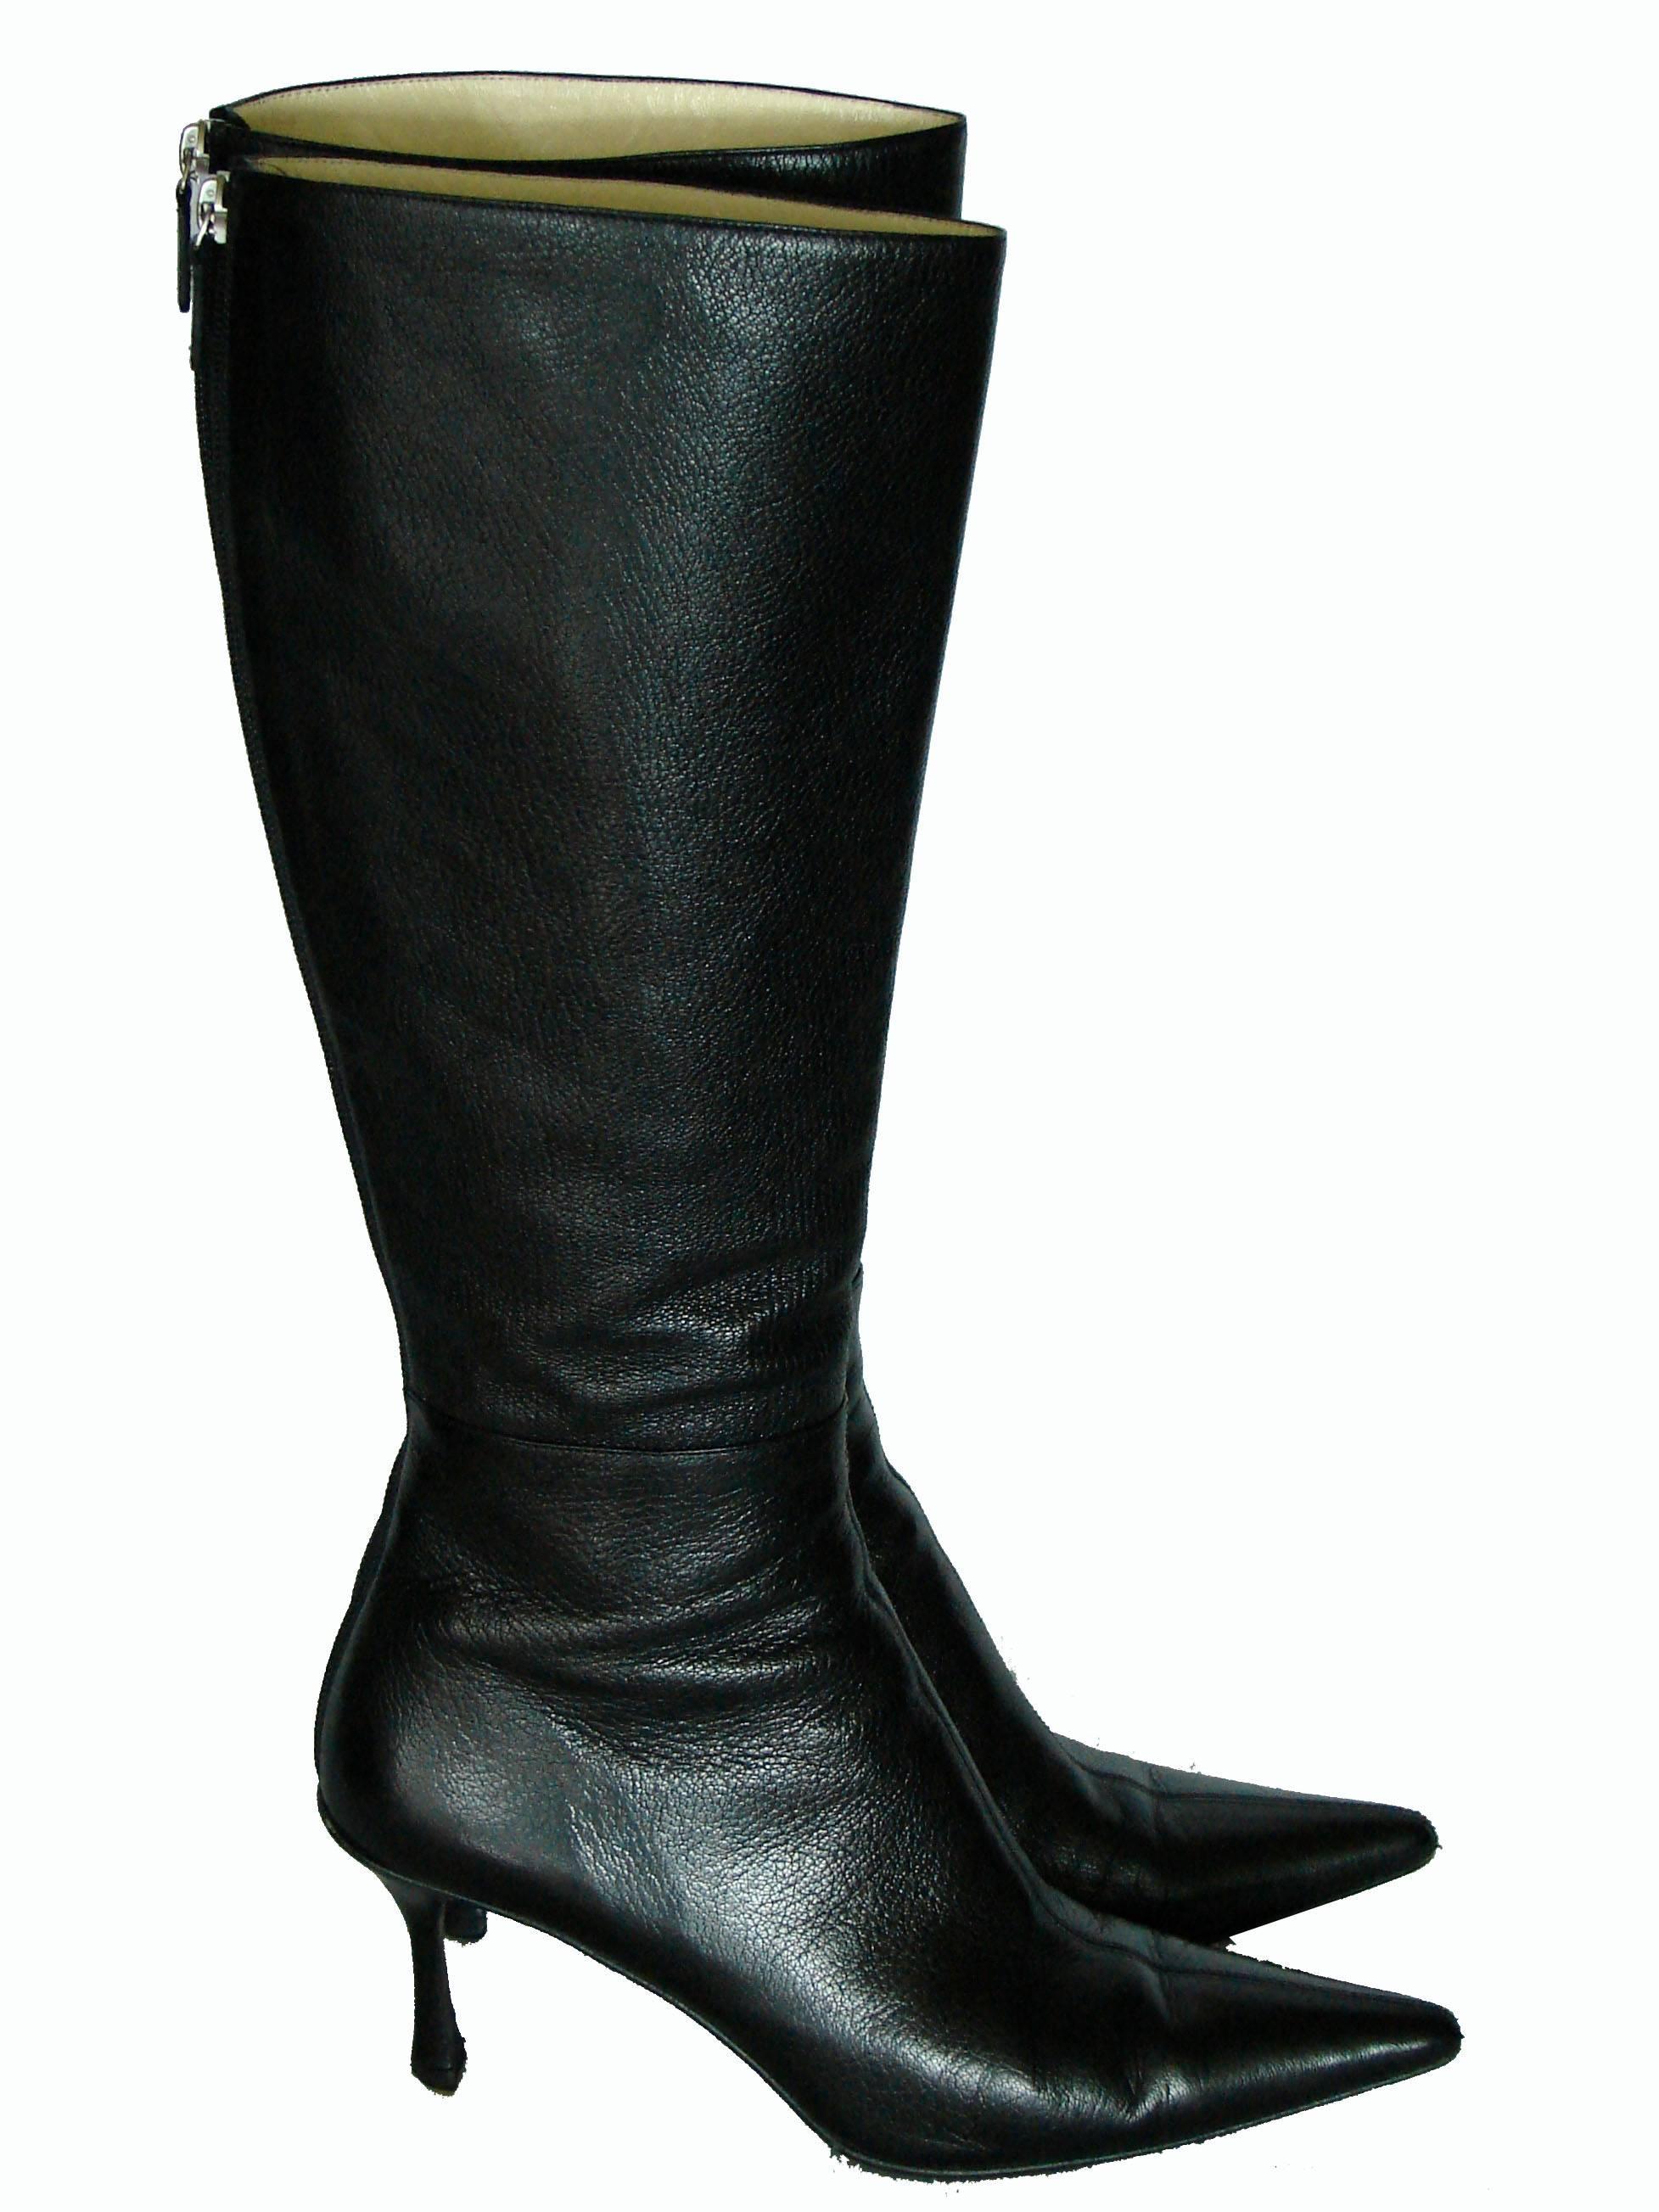 Here's an iconic pair of knee-high boots from GUCCI.  Made from black kidskin leather, these feature kitten heels and fasten with rear zippers.  In excellent condition overall, these appear to have been worn only a few times.  There is some wear to